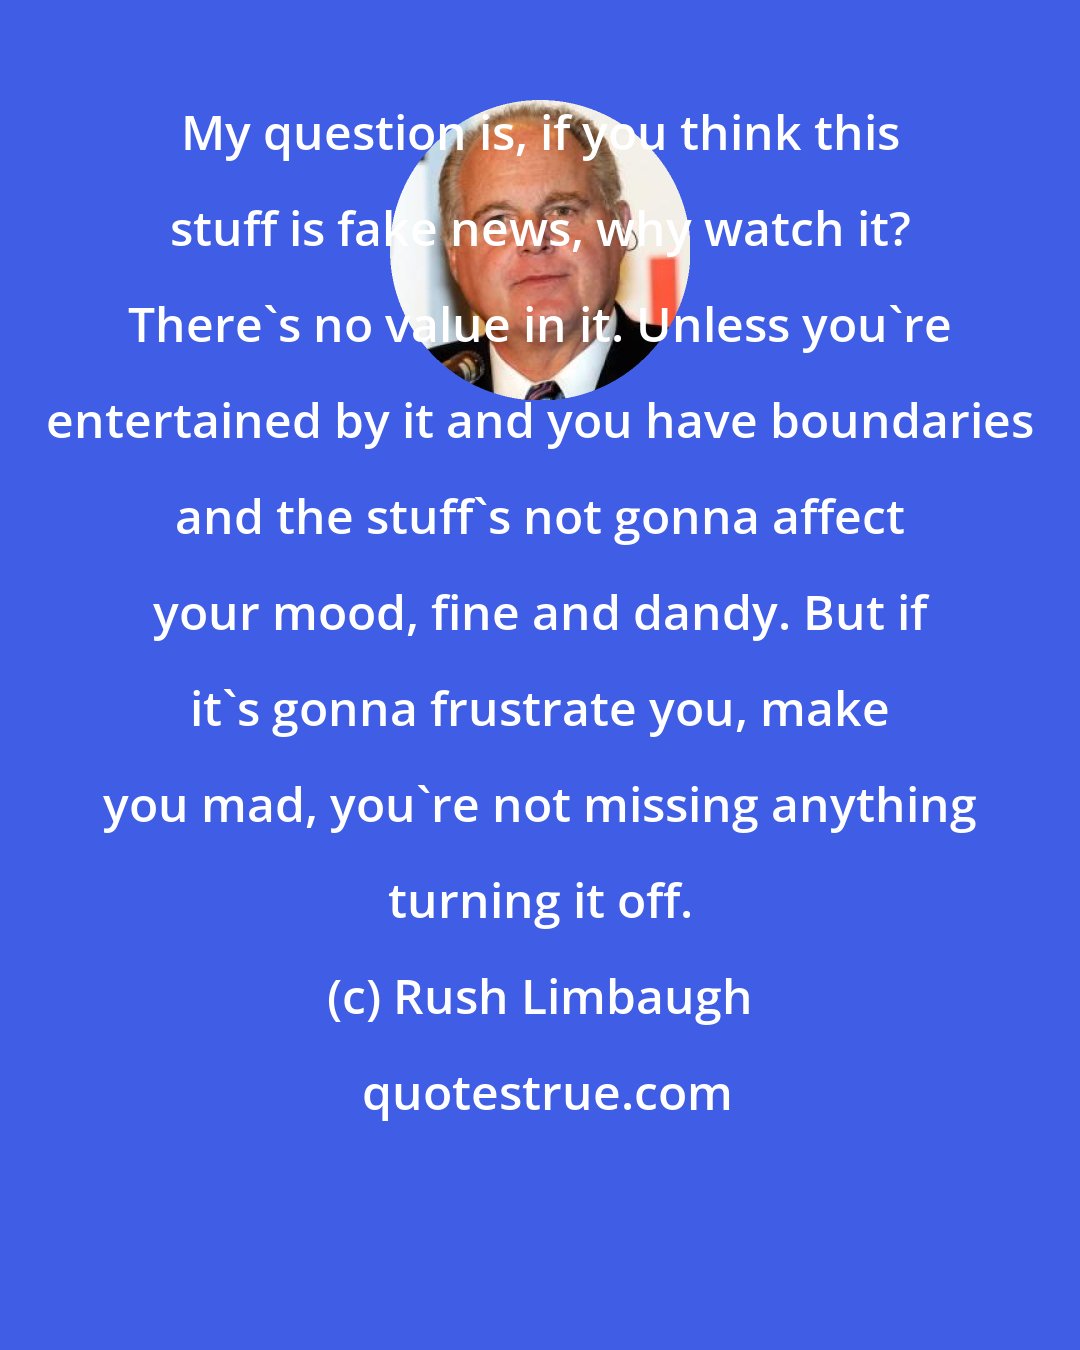 Rush Limbaugh: My question is, if you think this stuff is fake news, why watch it? There's no value in it. Unless you're entertained by it and you have boundaries and the stuff's not gonna affect your mood, fine and dandy. But if it's gonna frustrate you, make you mad, you're not missing anything turning it off.